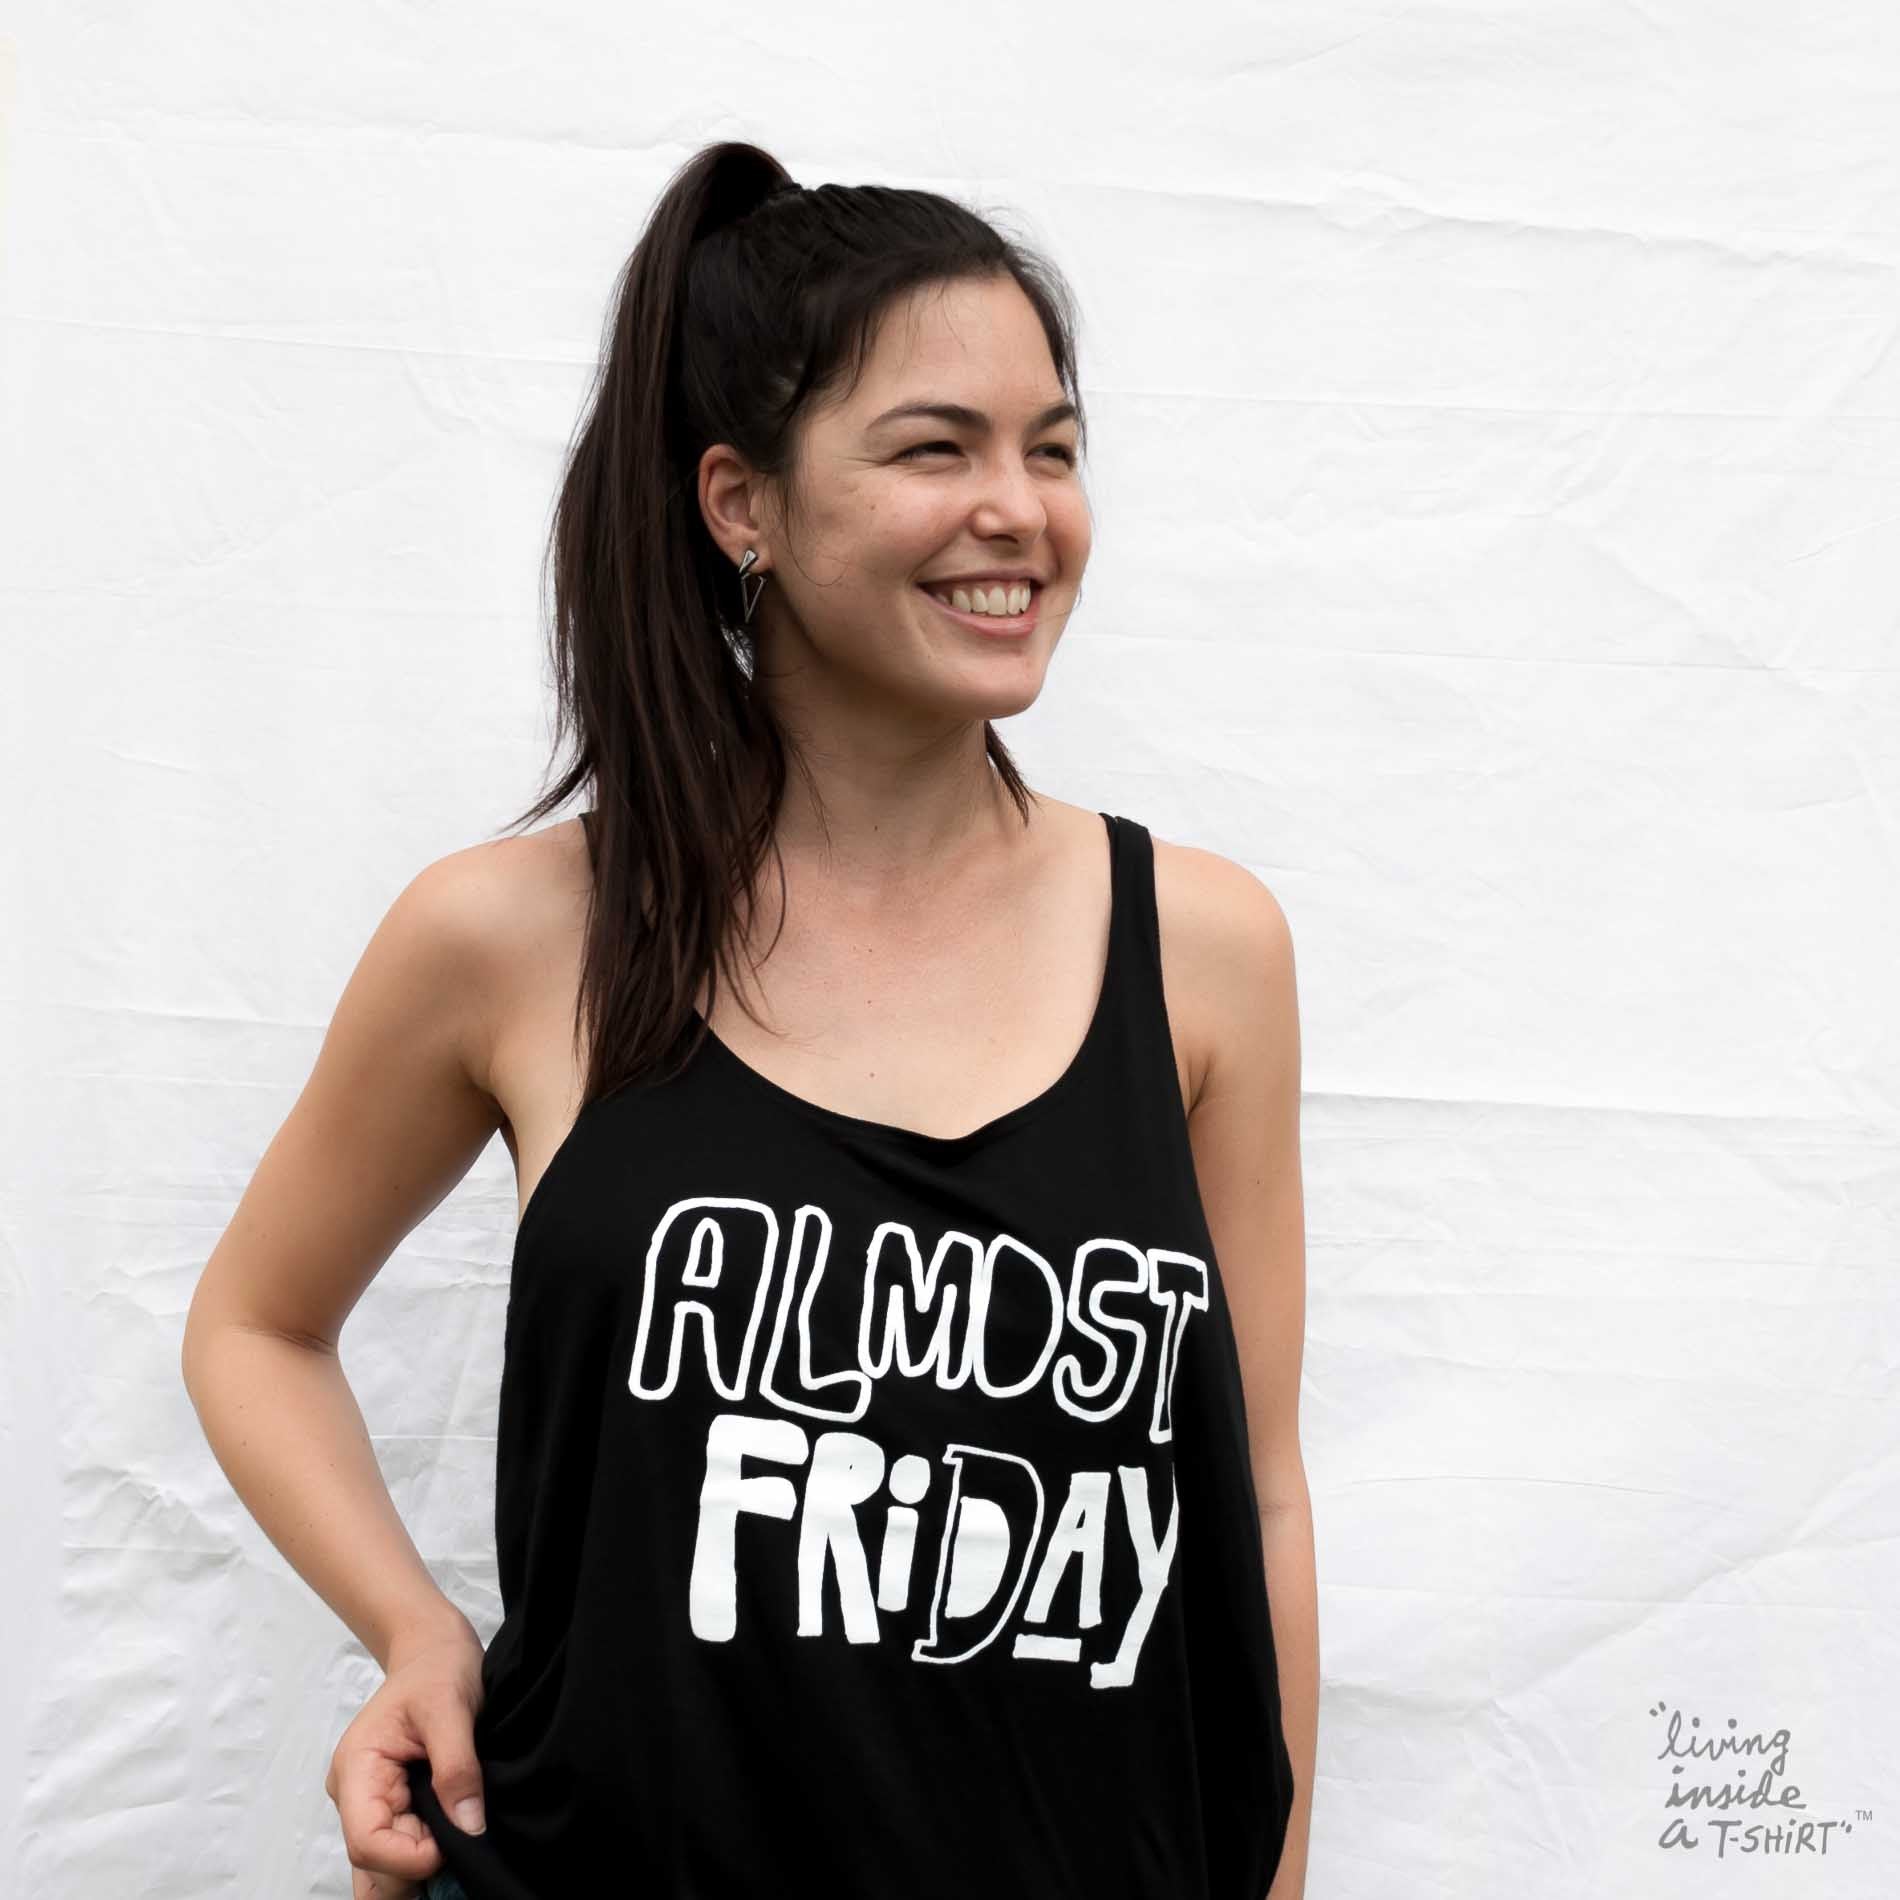 Almost Friday - Tank Top